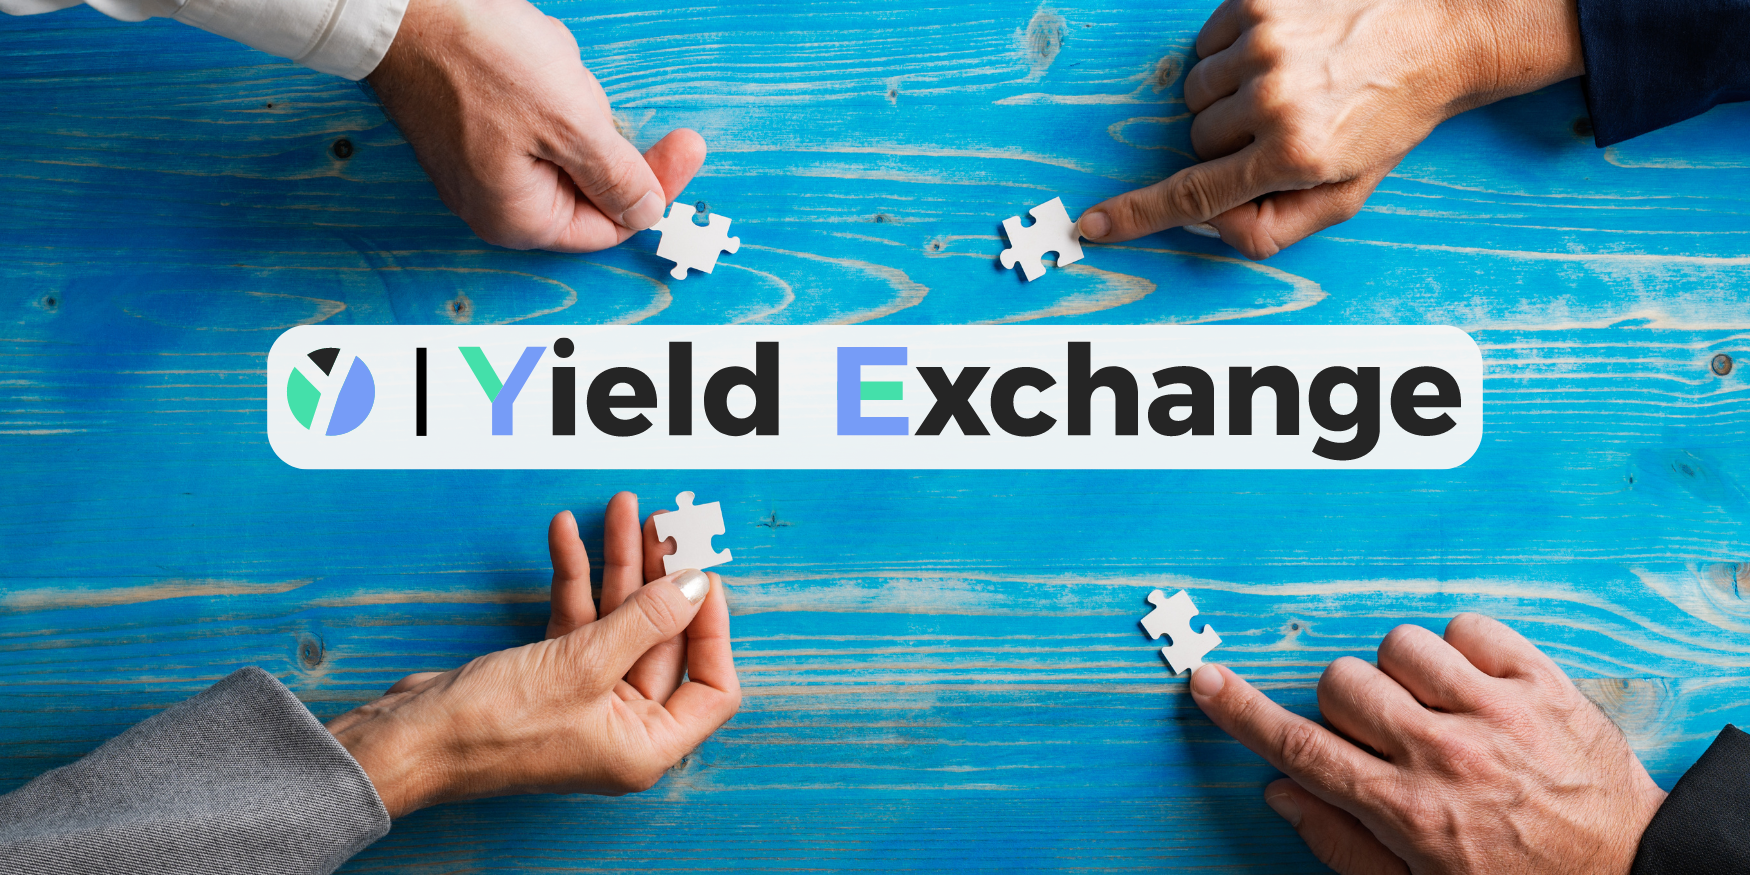 One hand in each corner holding a puzzle piece over a blue table, arms angled towards centre, with the Yield Exchange Logo in the middle.